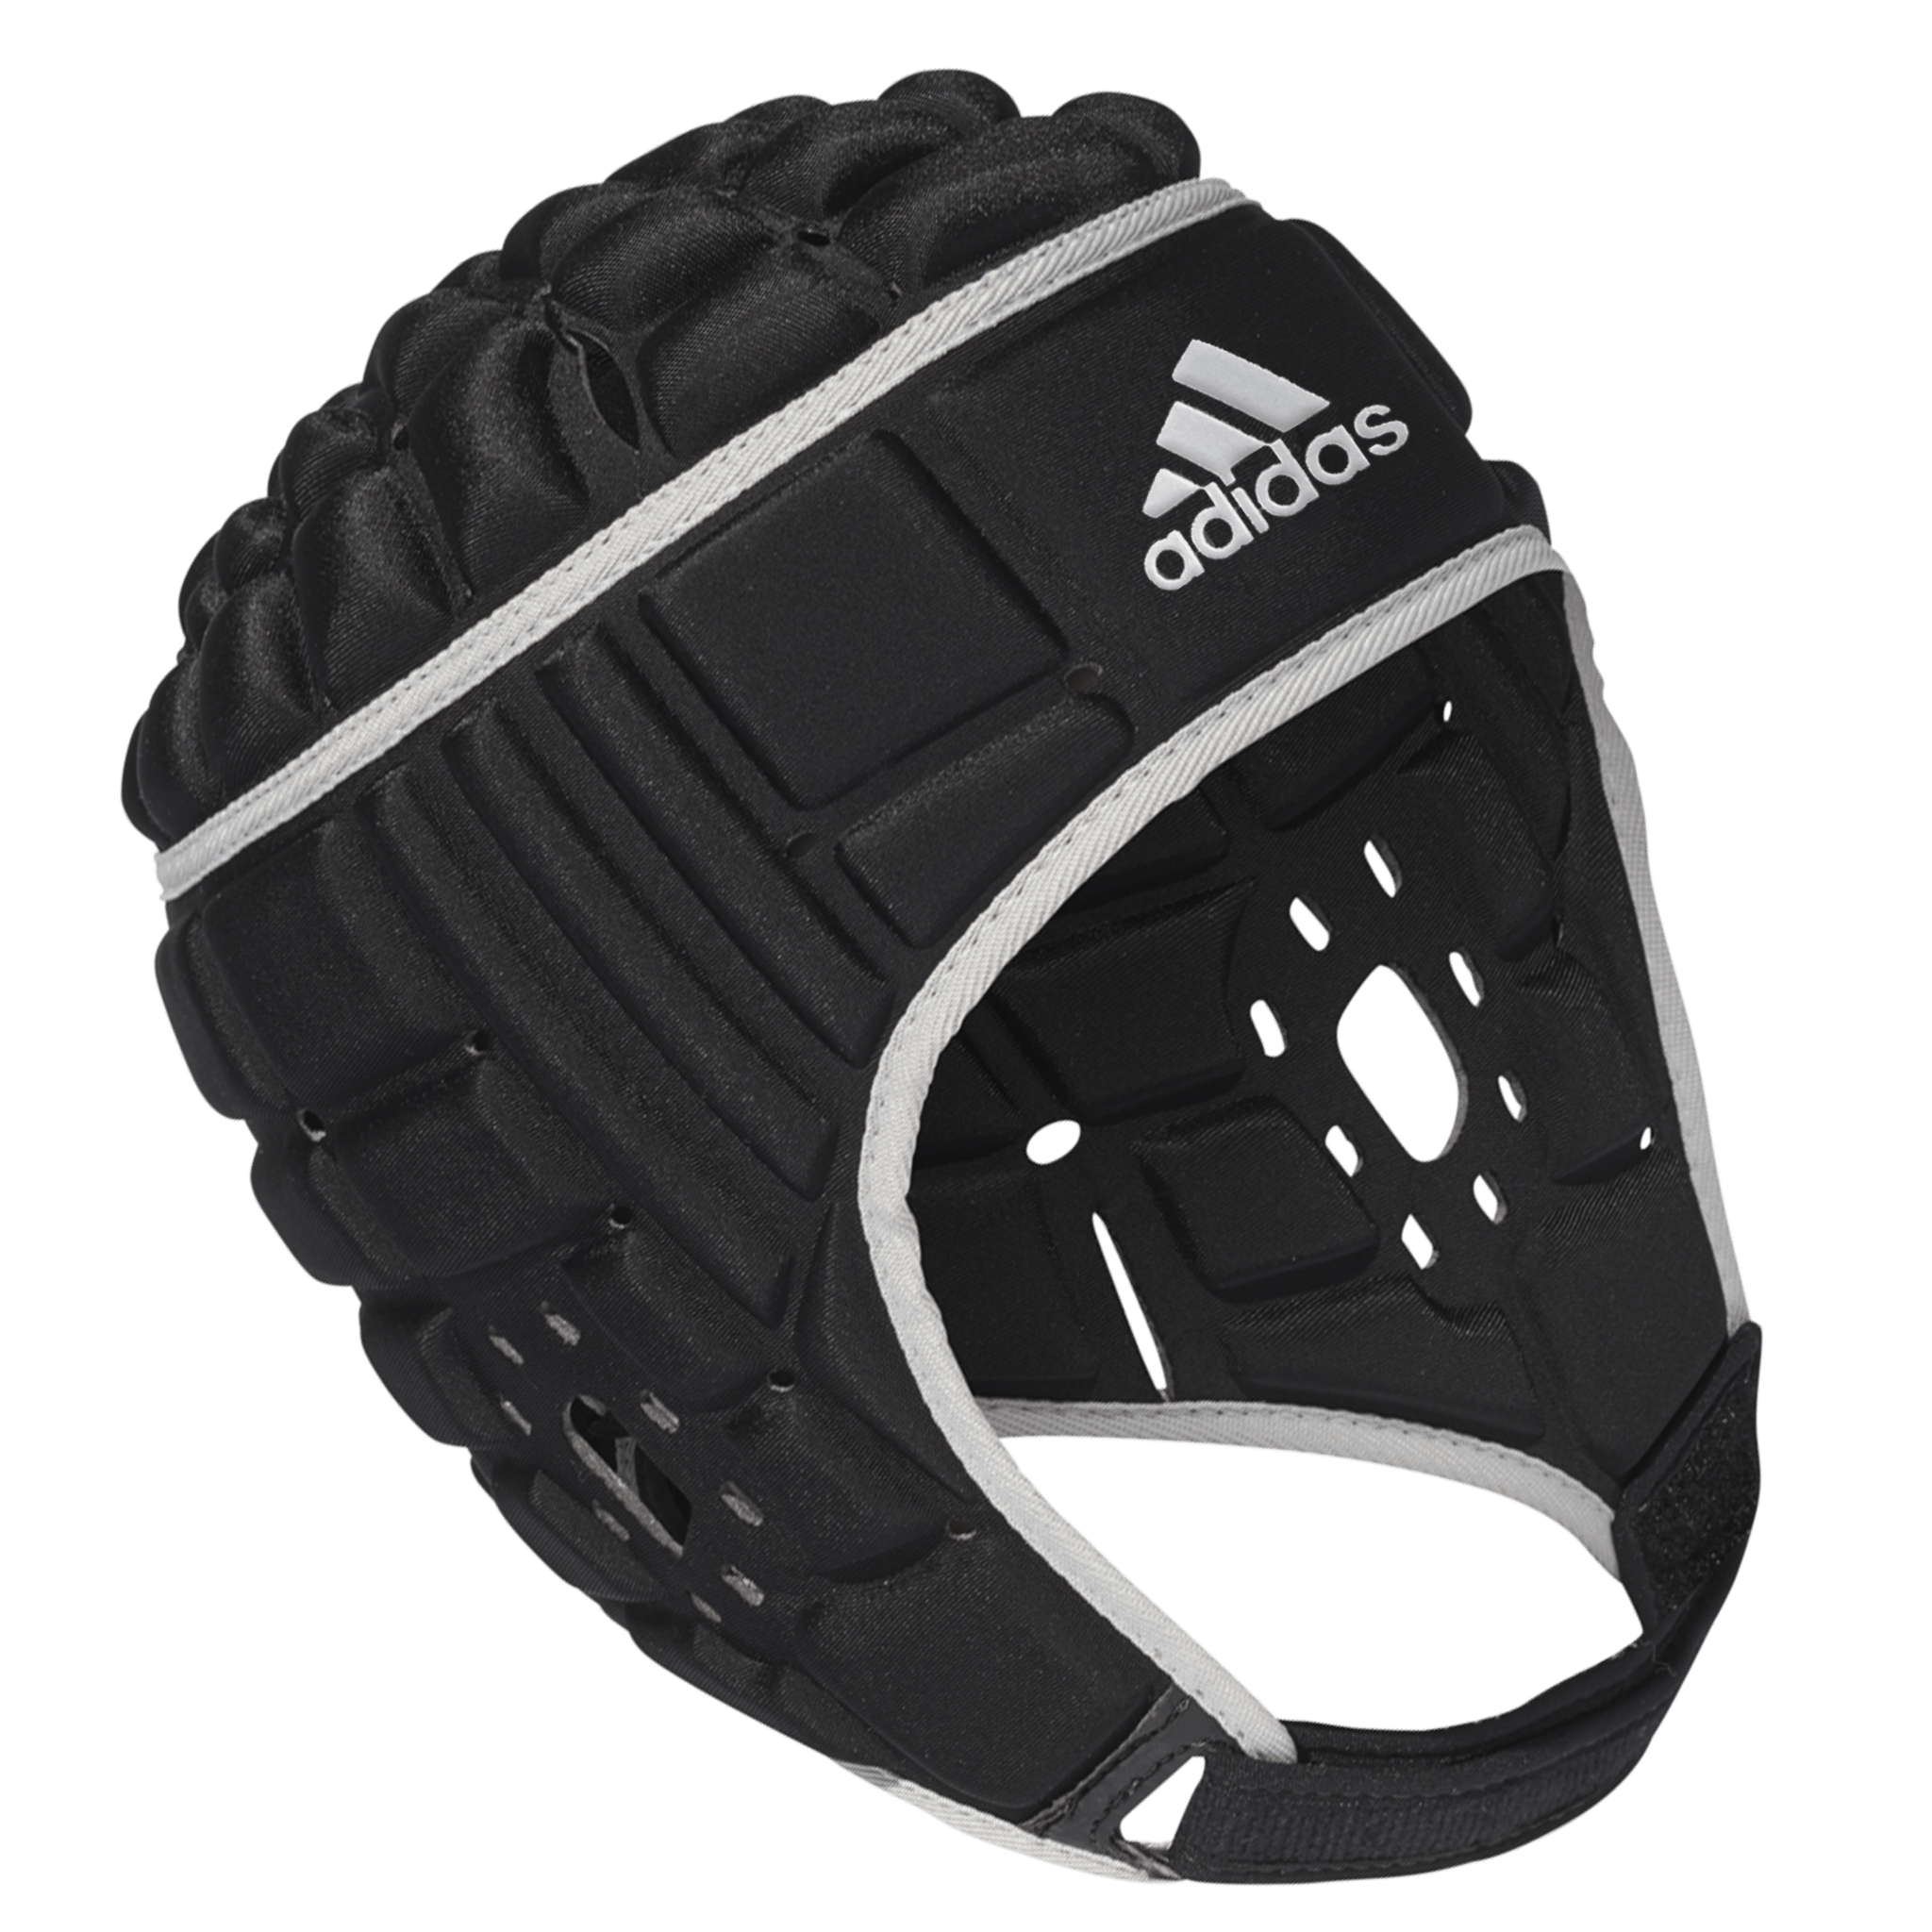 tage Slime gryde adidas Black/Matte Silver Rugby Scrum Cap Head Guard - World Rugby Shop